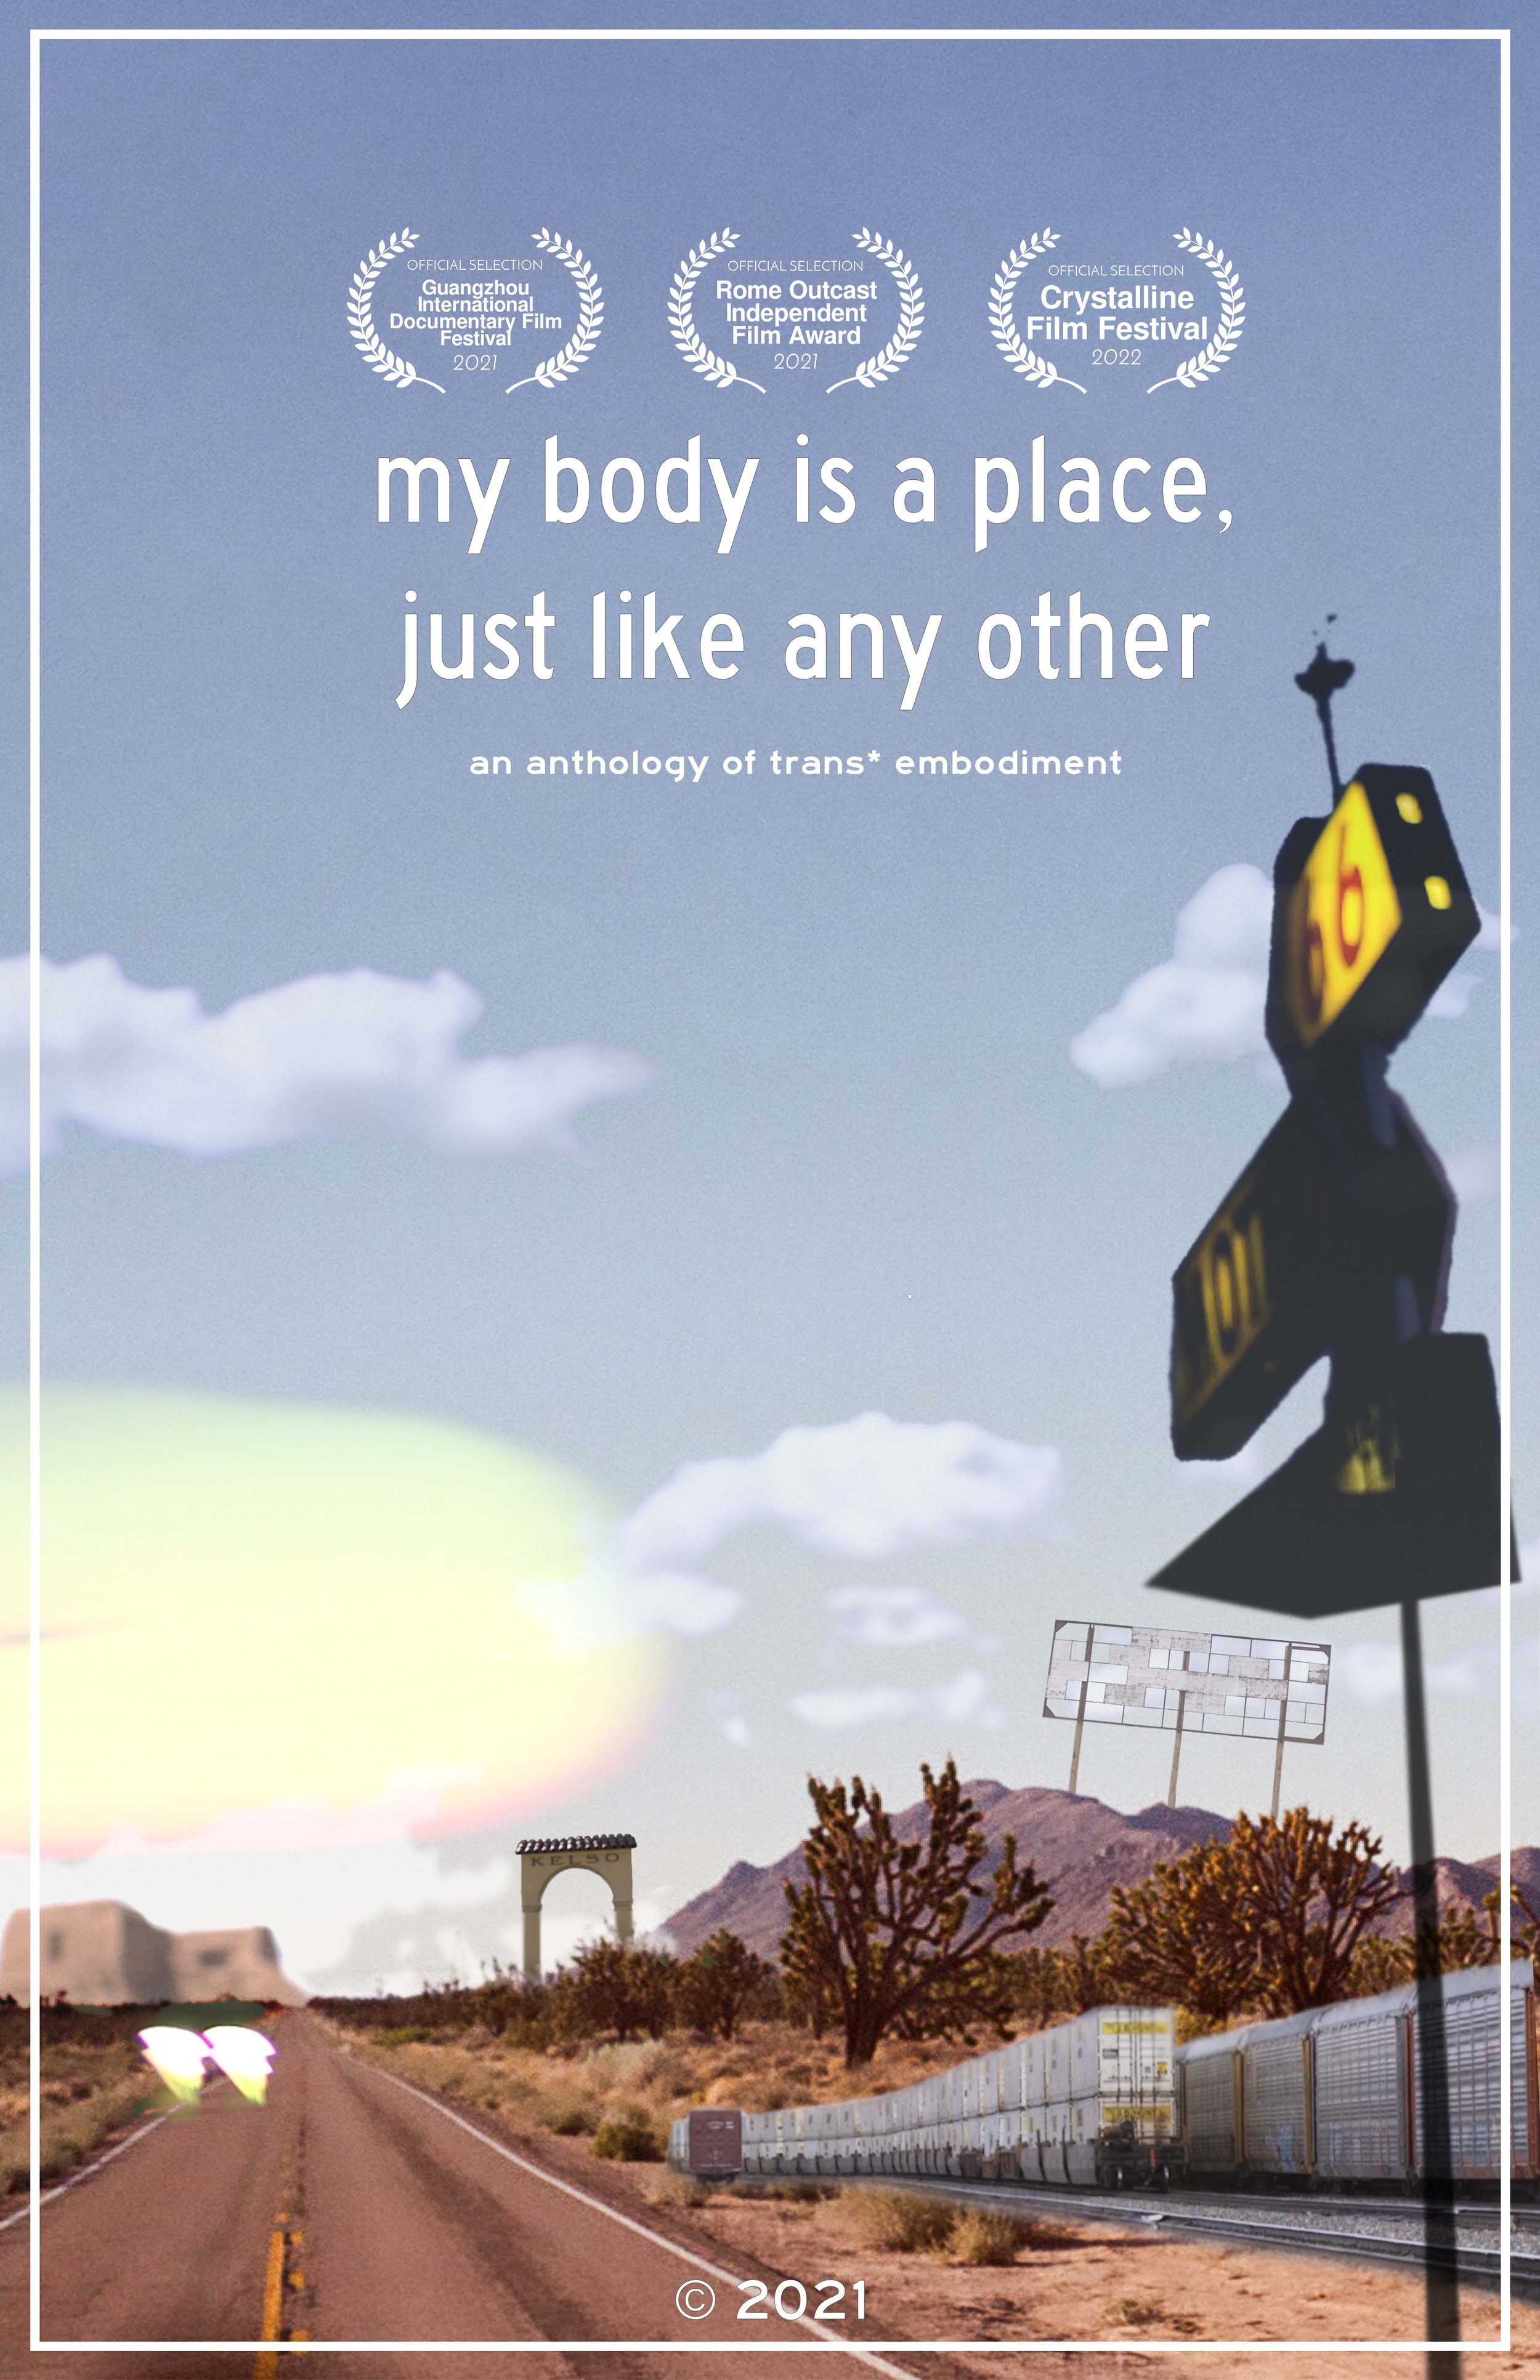 my body is a place, just like any other